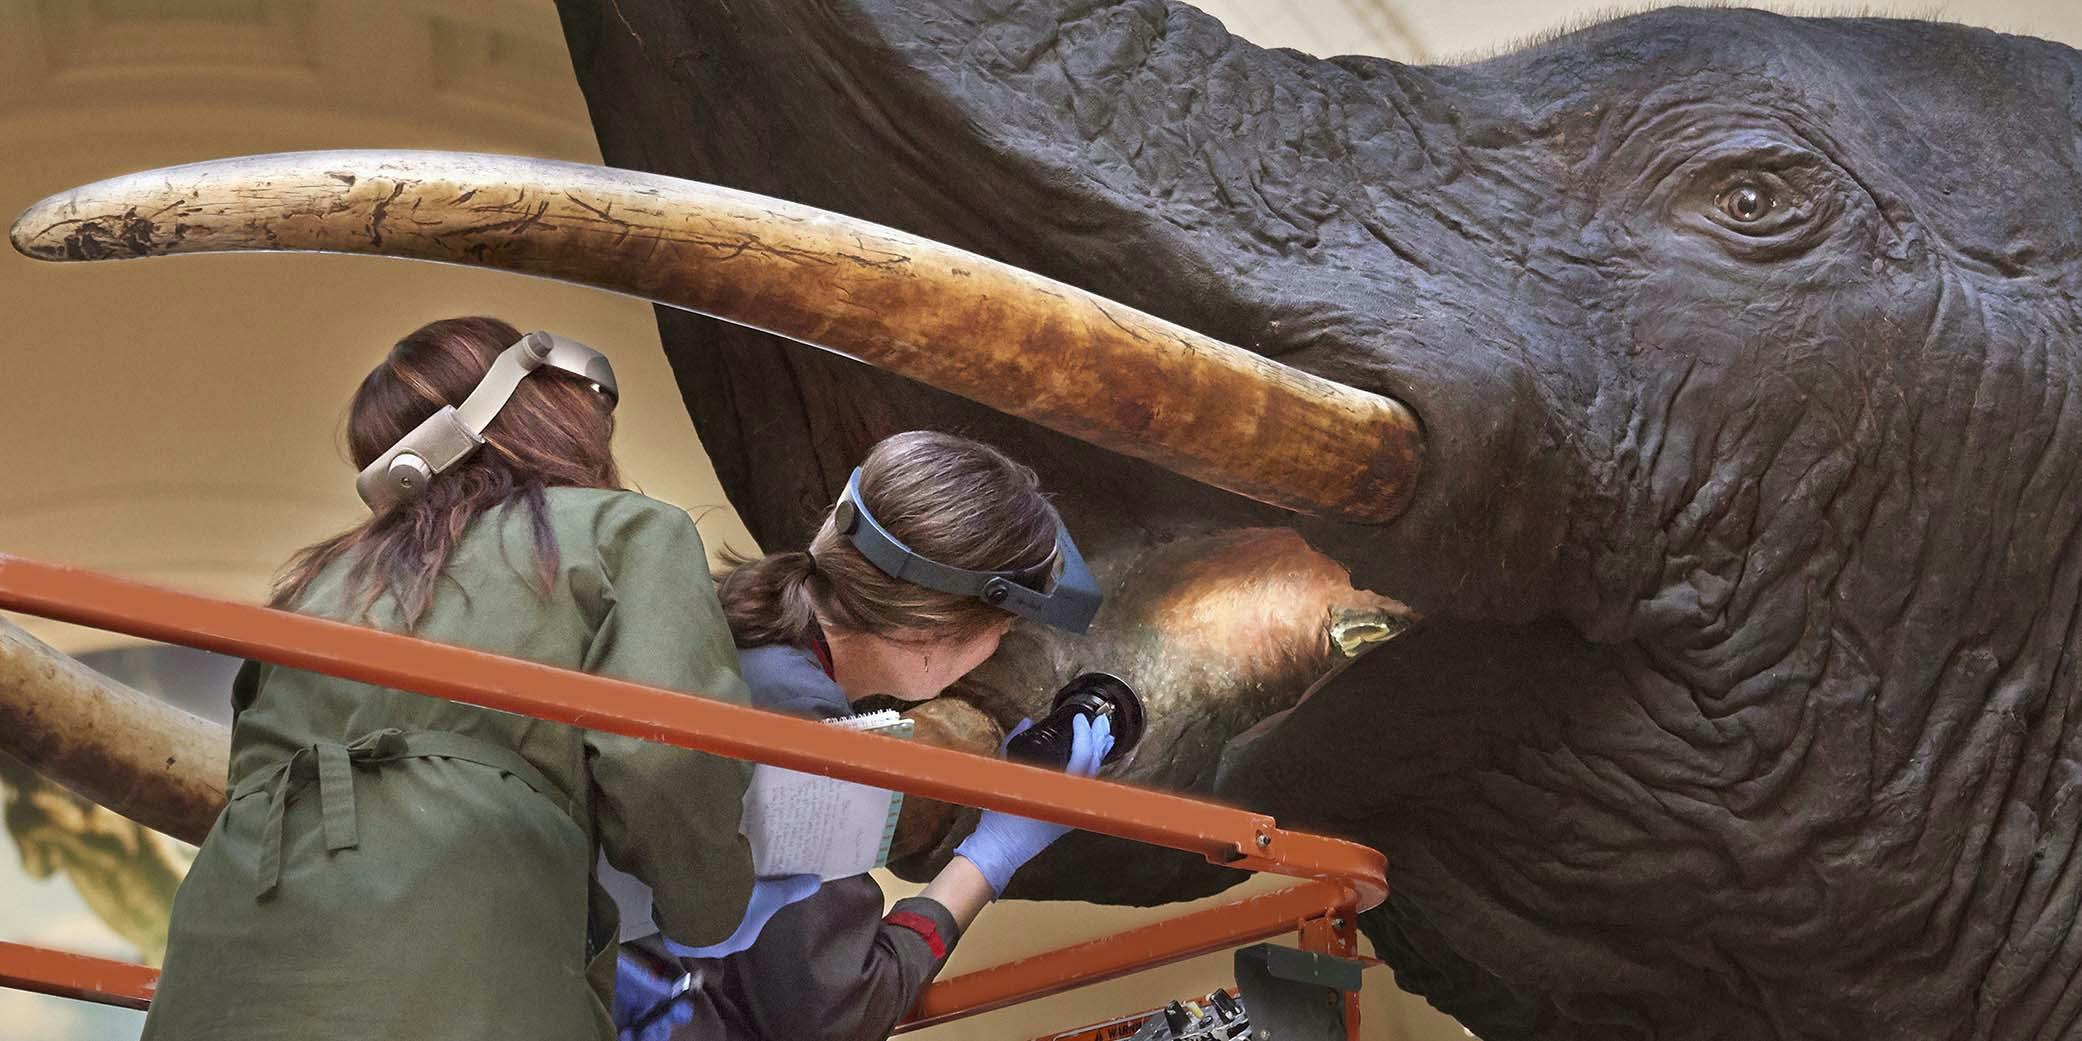 Two women wearing headlamps peer into the mouth of a large taxidermy elephant